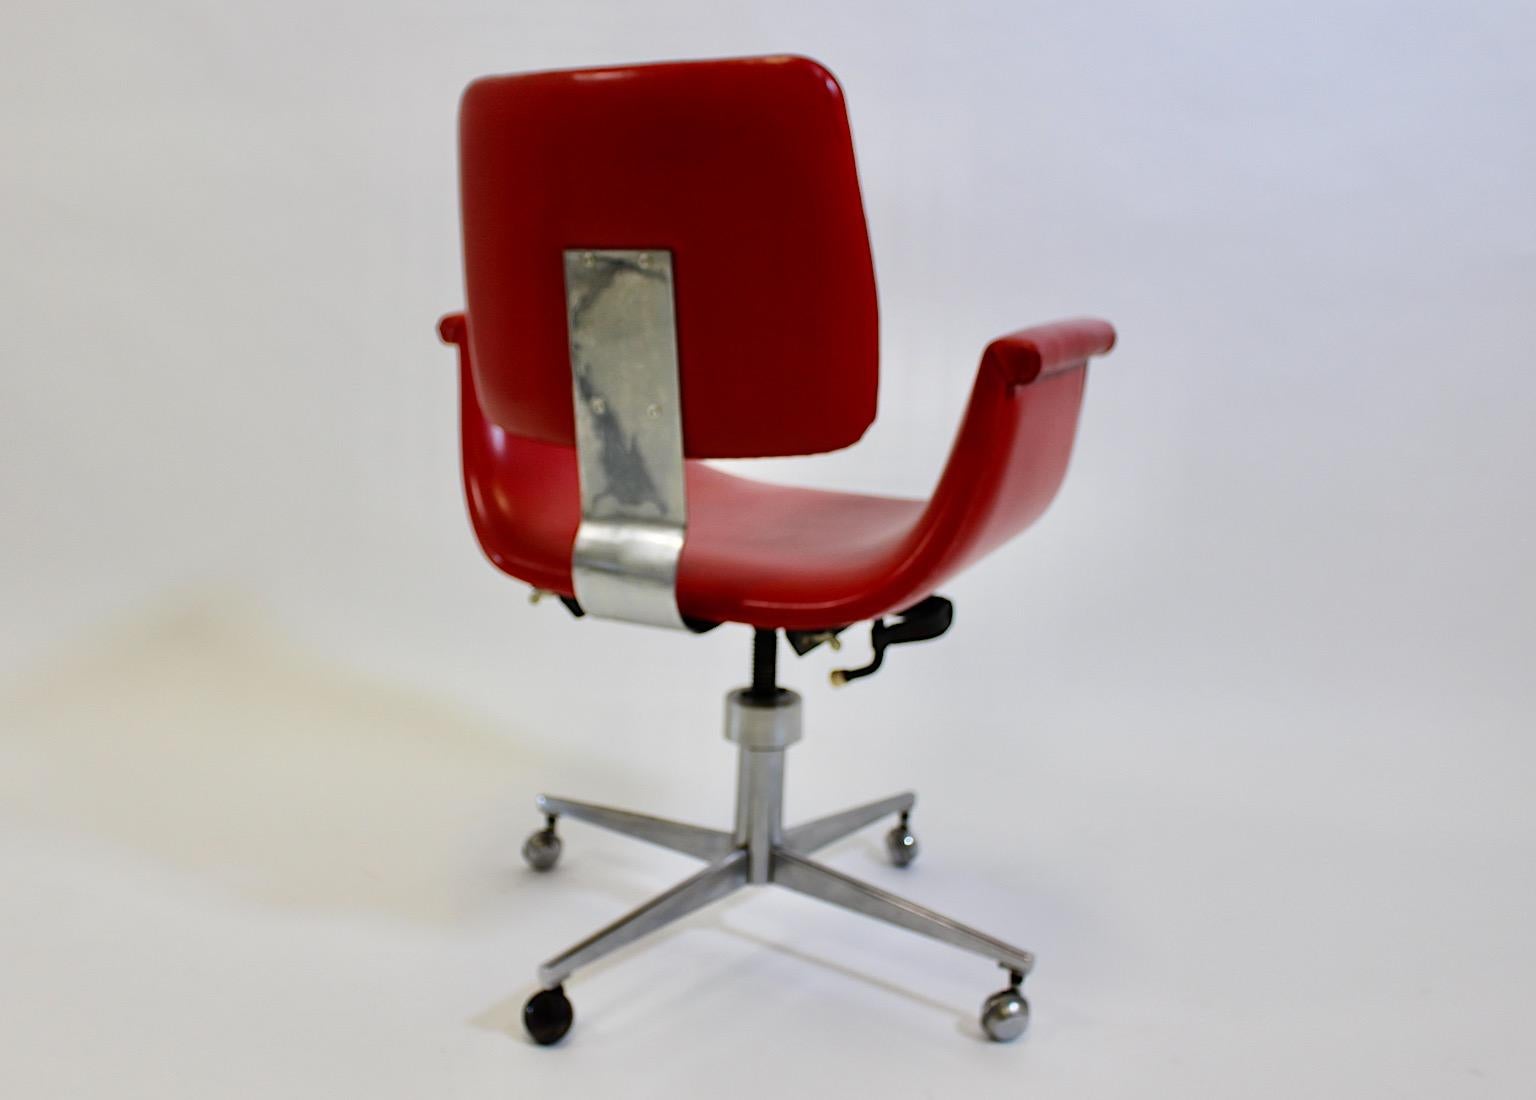 Space Age Vintage Red Faux Leather Chrome Metal Office Chair Desk Chair 1960s For Sale 5